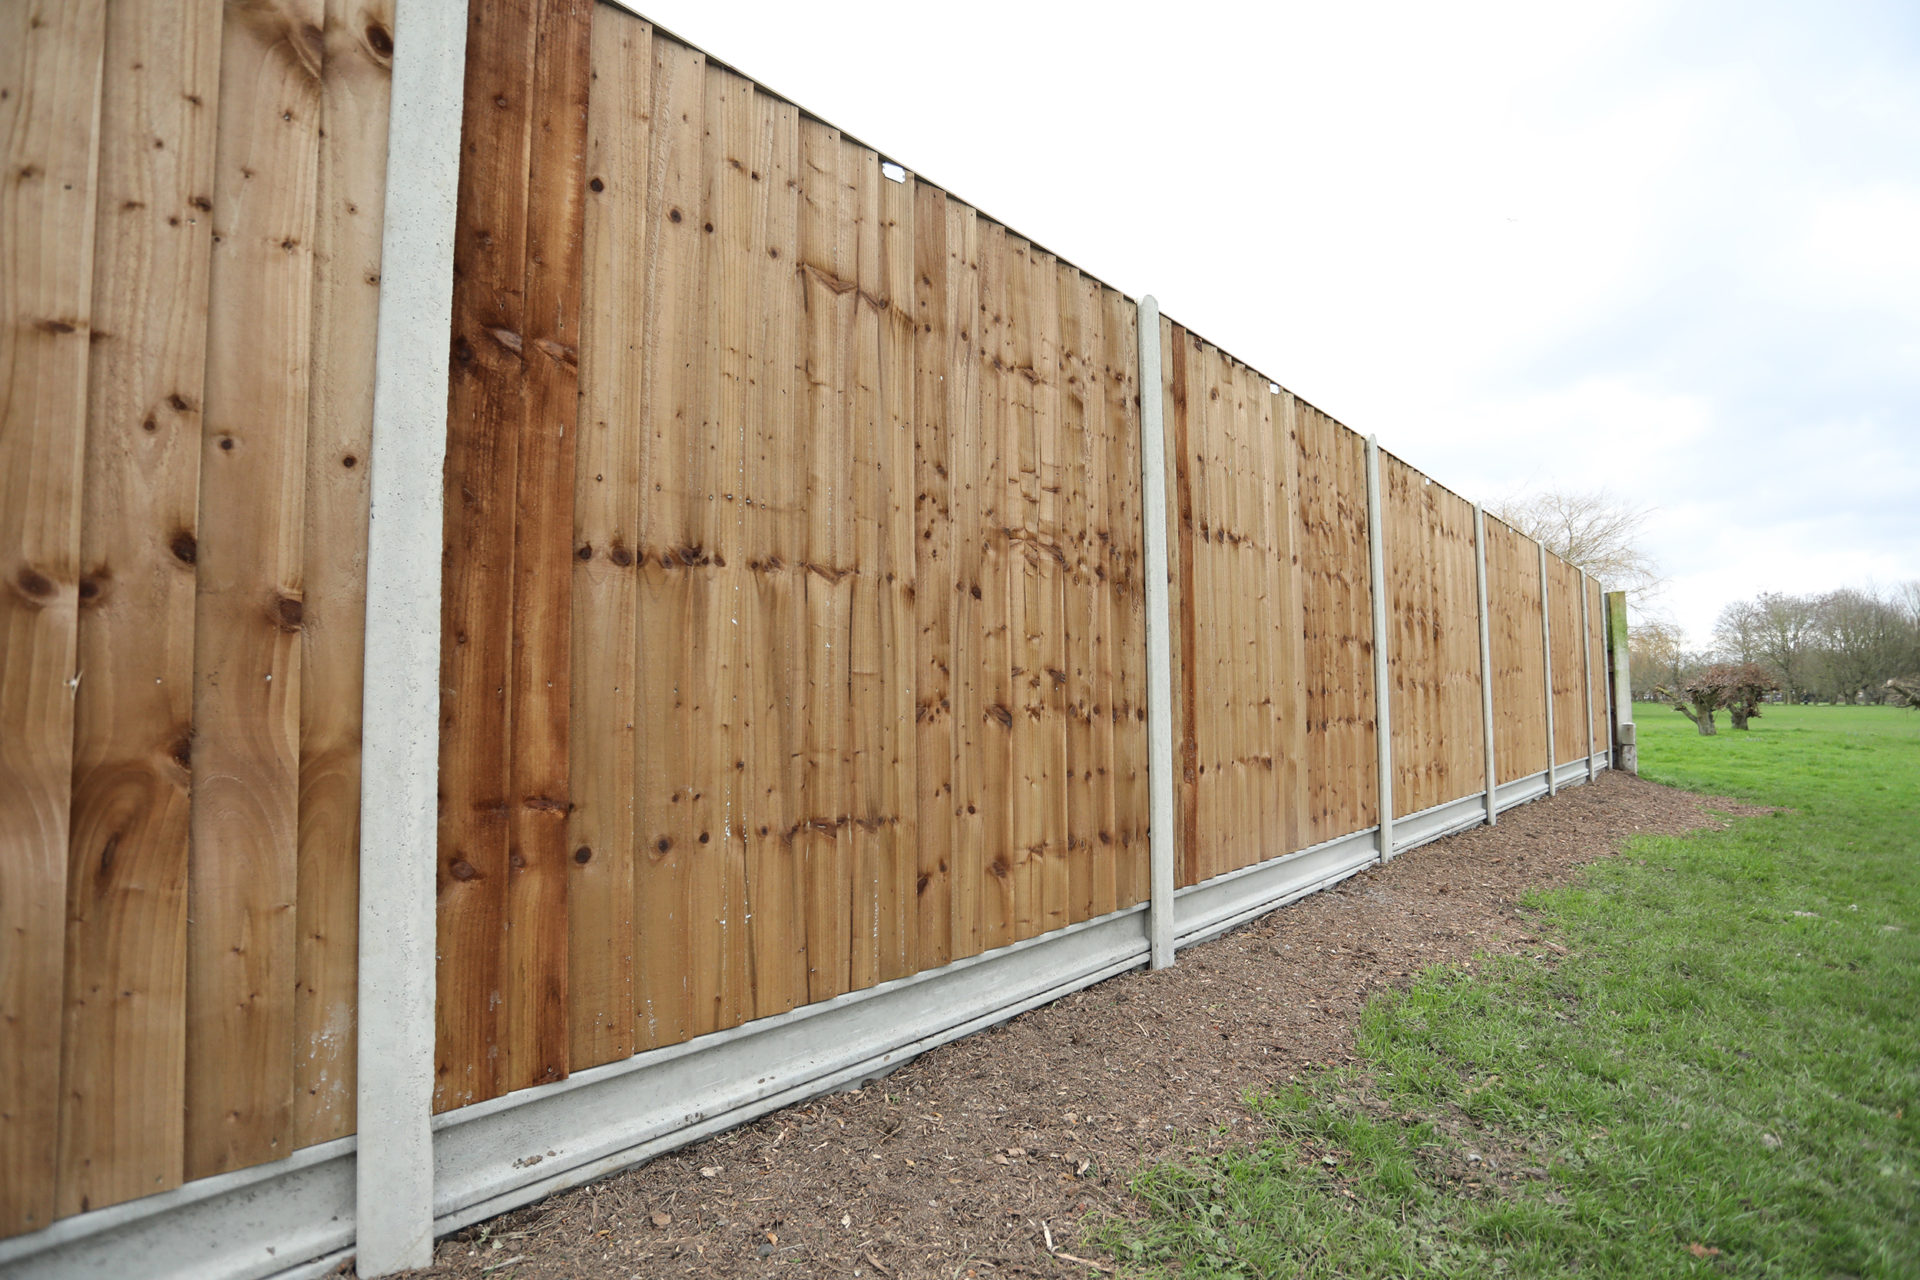 The benefits of concrete fence posts and gravel boards